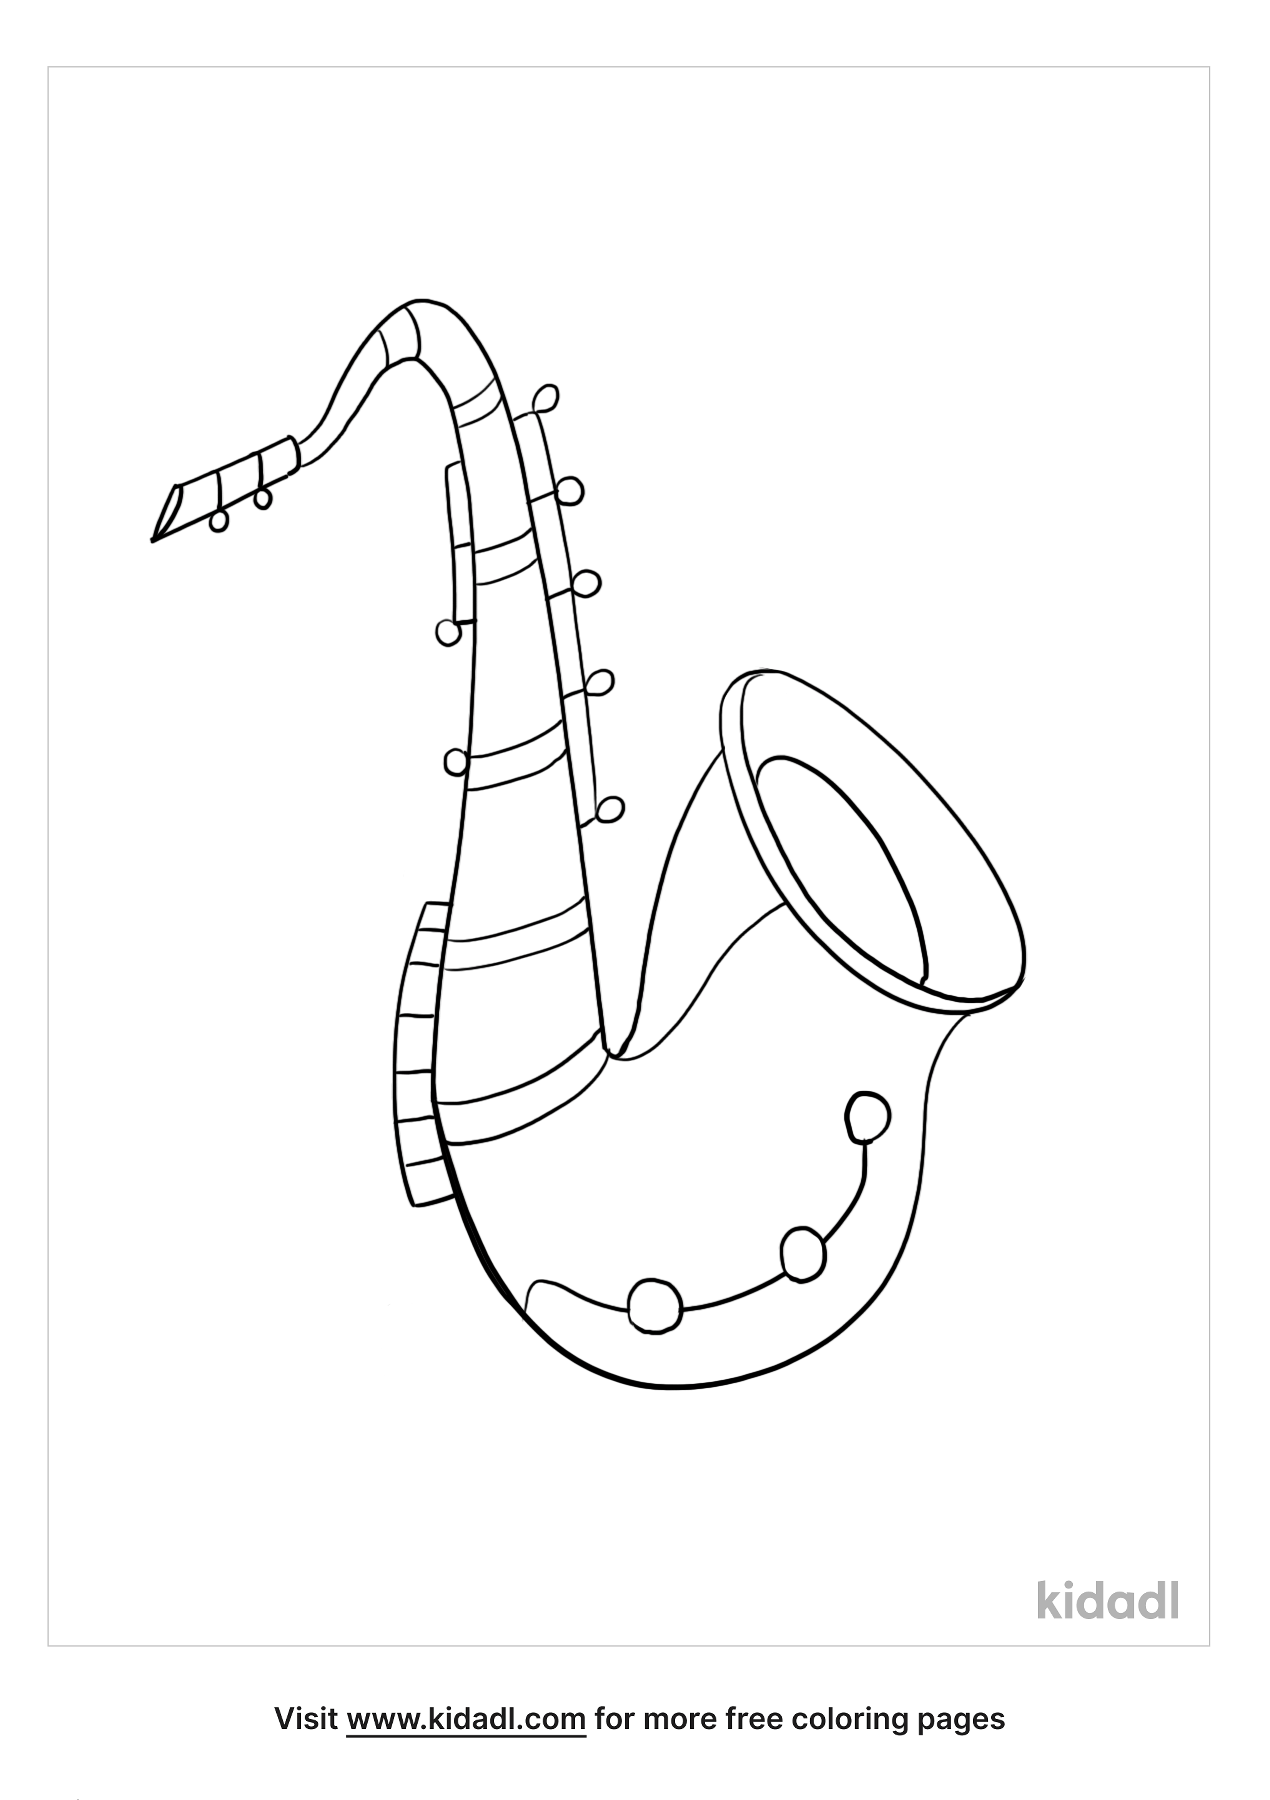 Saxophone Coloring Pages | Free Music Coloring Pages | Kidadl